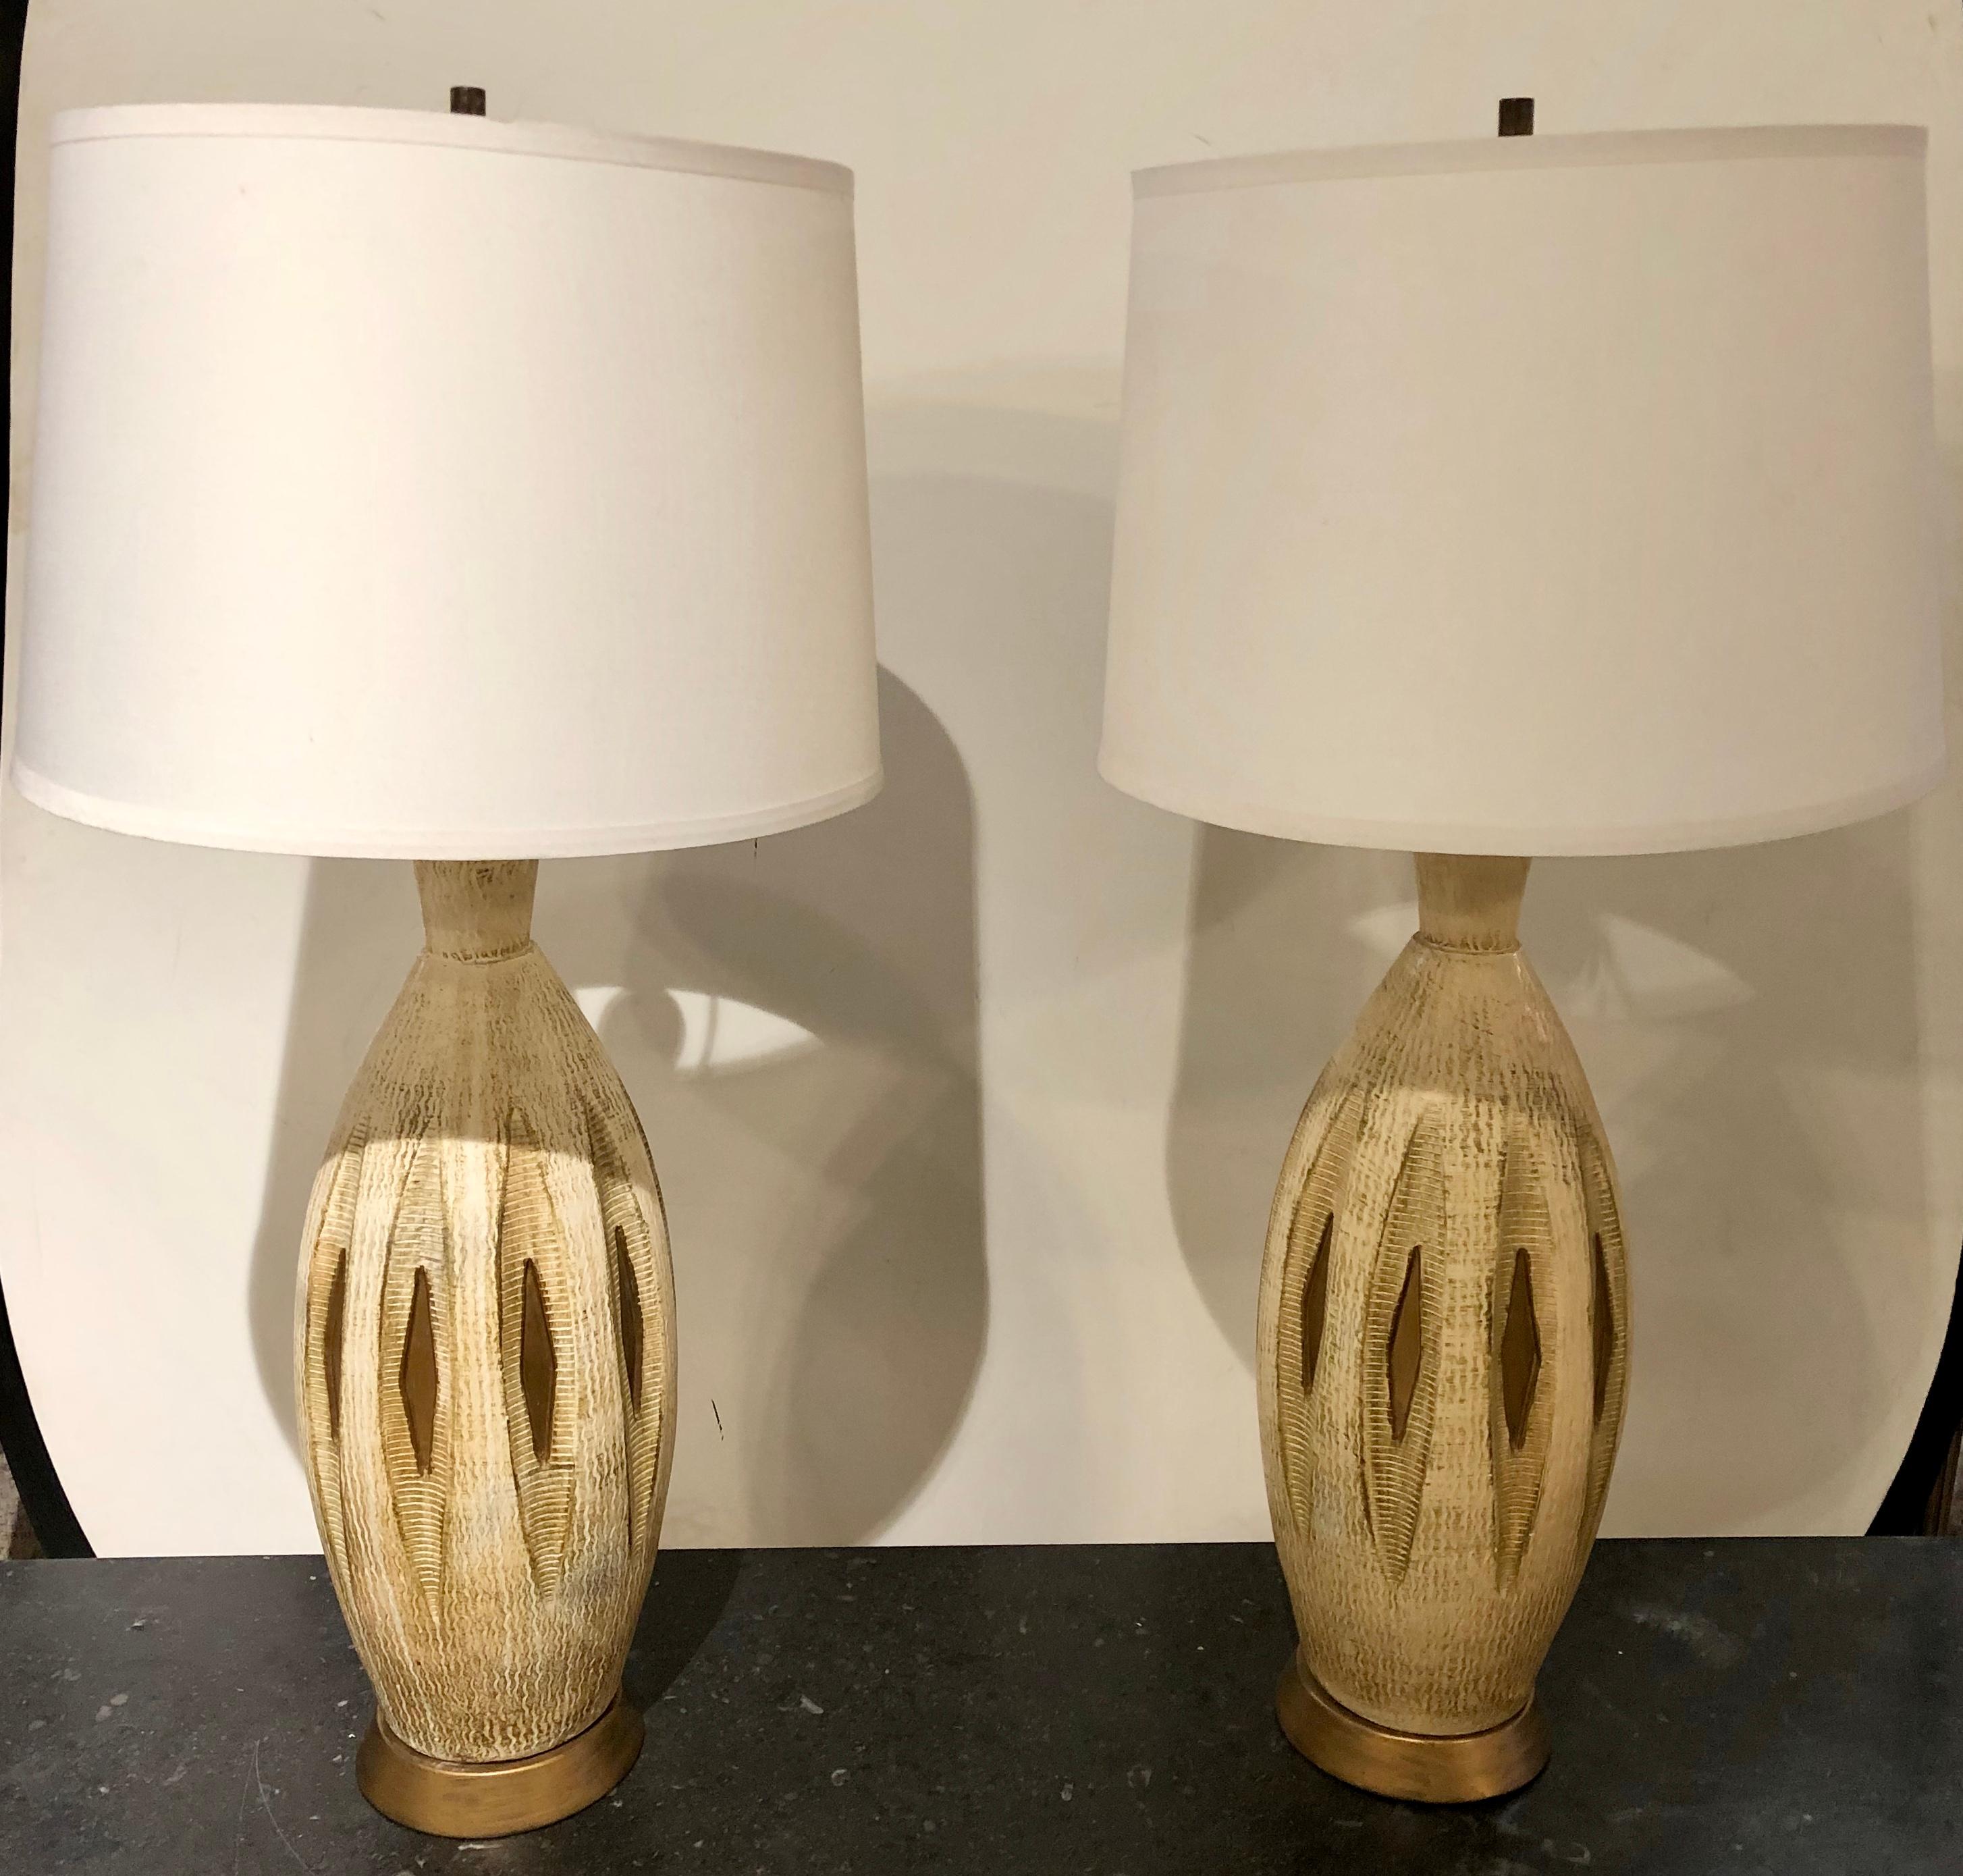 A pair of Mid-Century Modern table lamps.